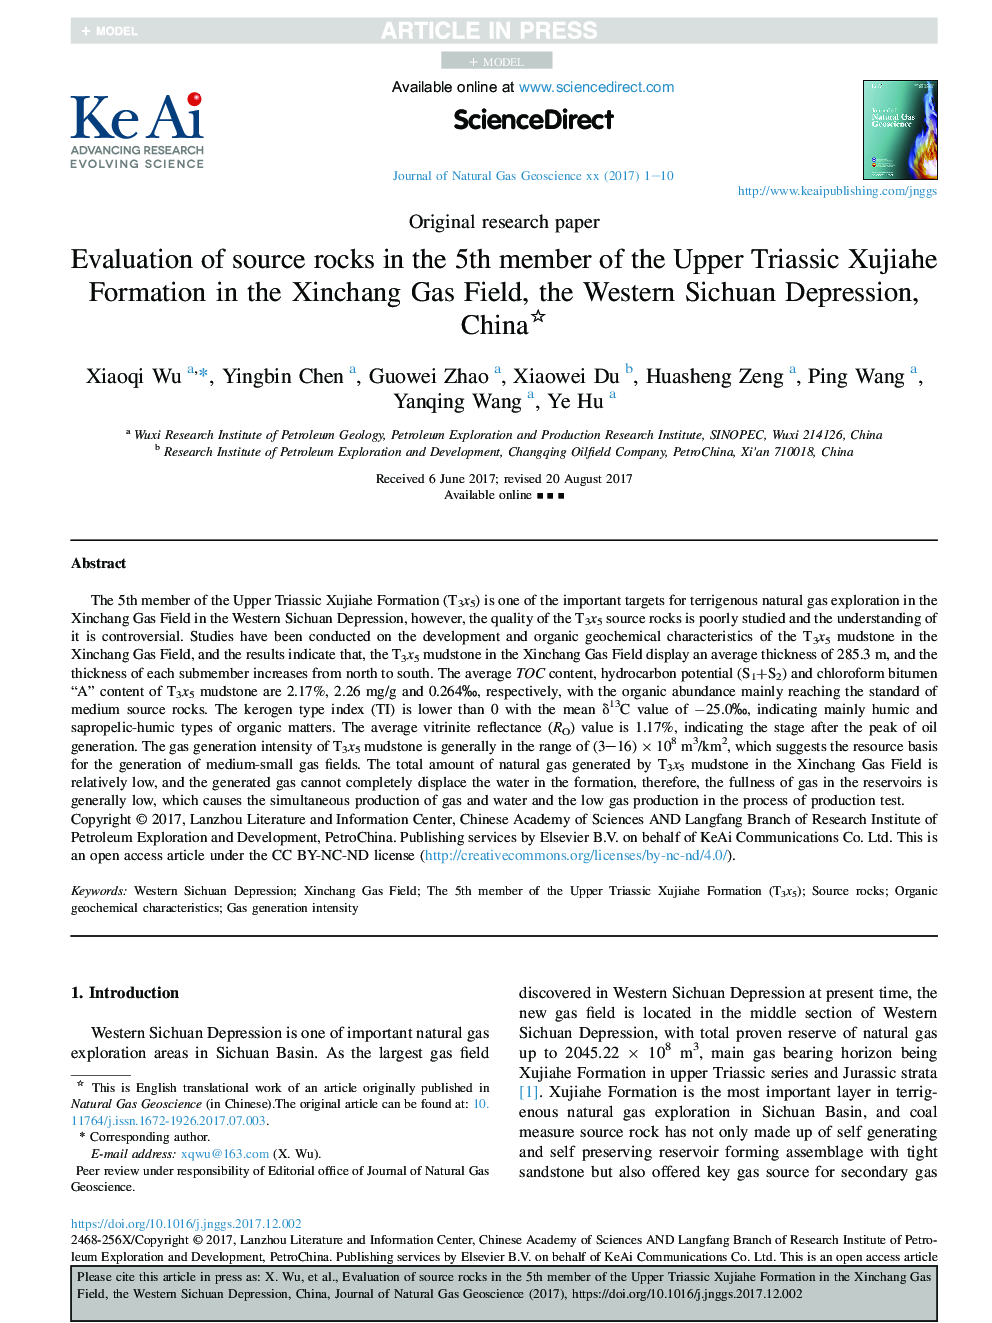 Evaluation of source rocks in the 5th member of the Upper Triassic Xujiahe Formation in the Xinchang Gas Field, the Western Sichuan Depression, China